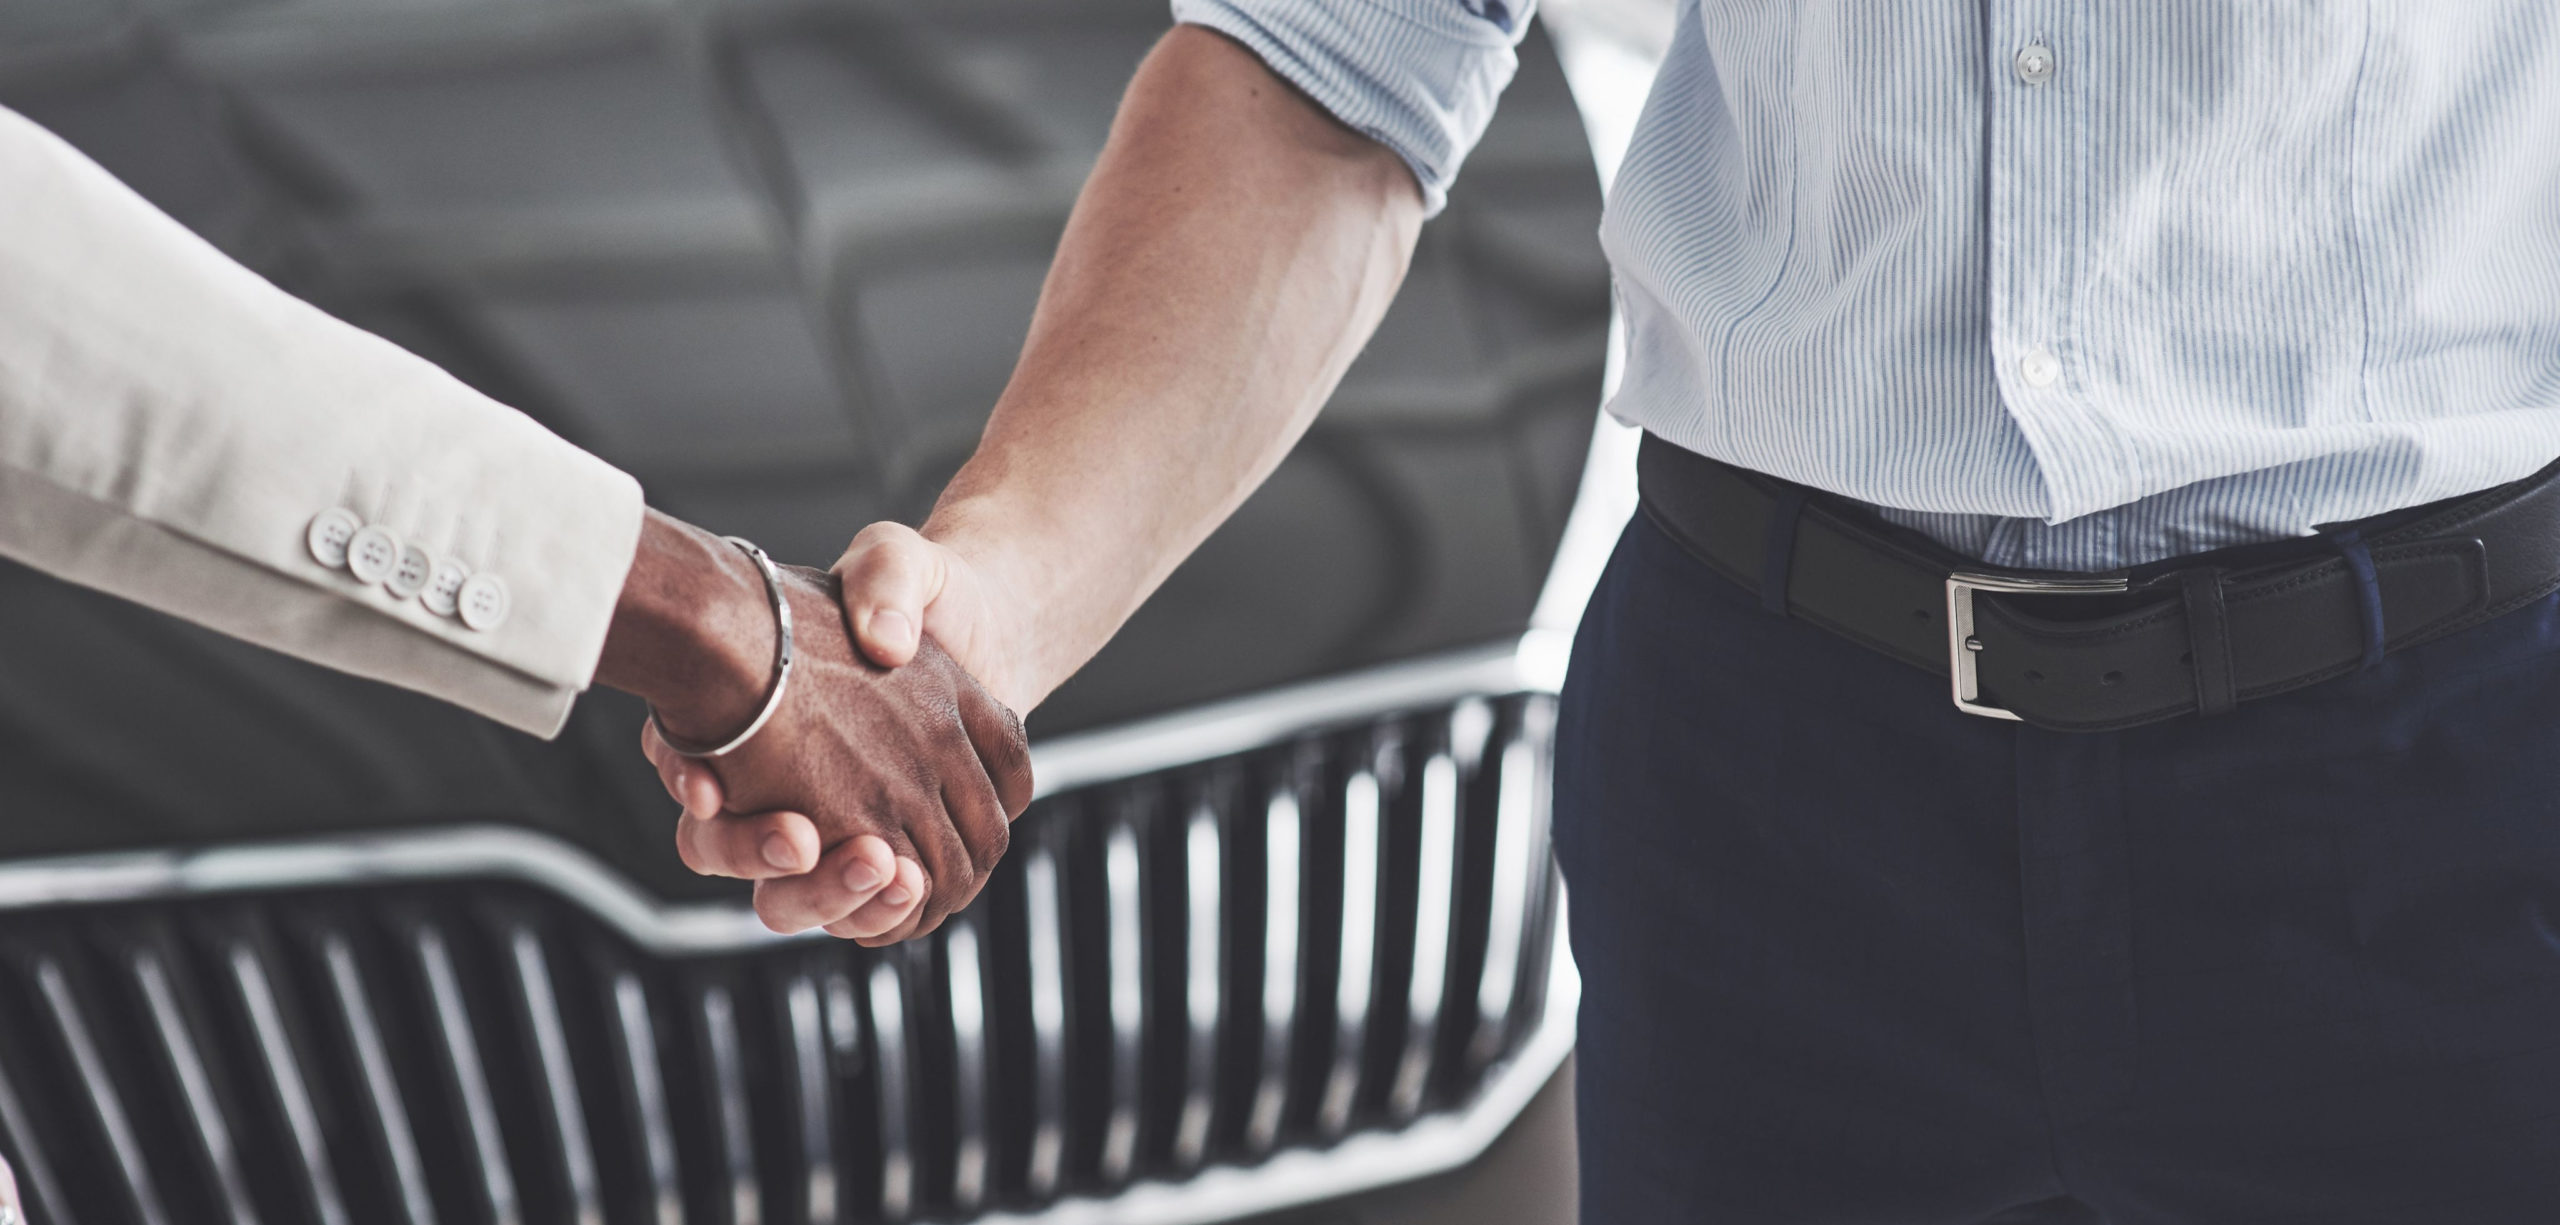 Men Shaking hands in front of a car